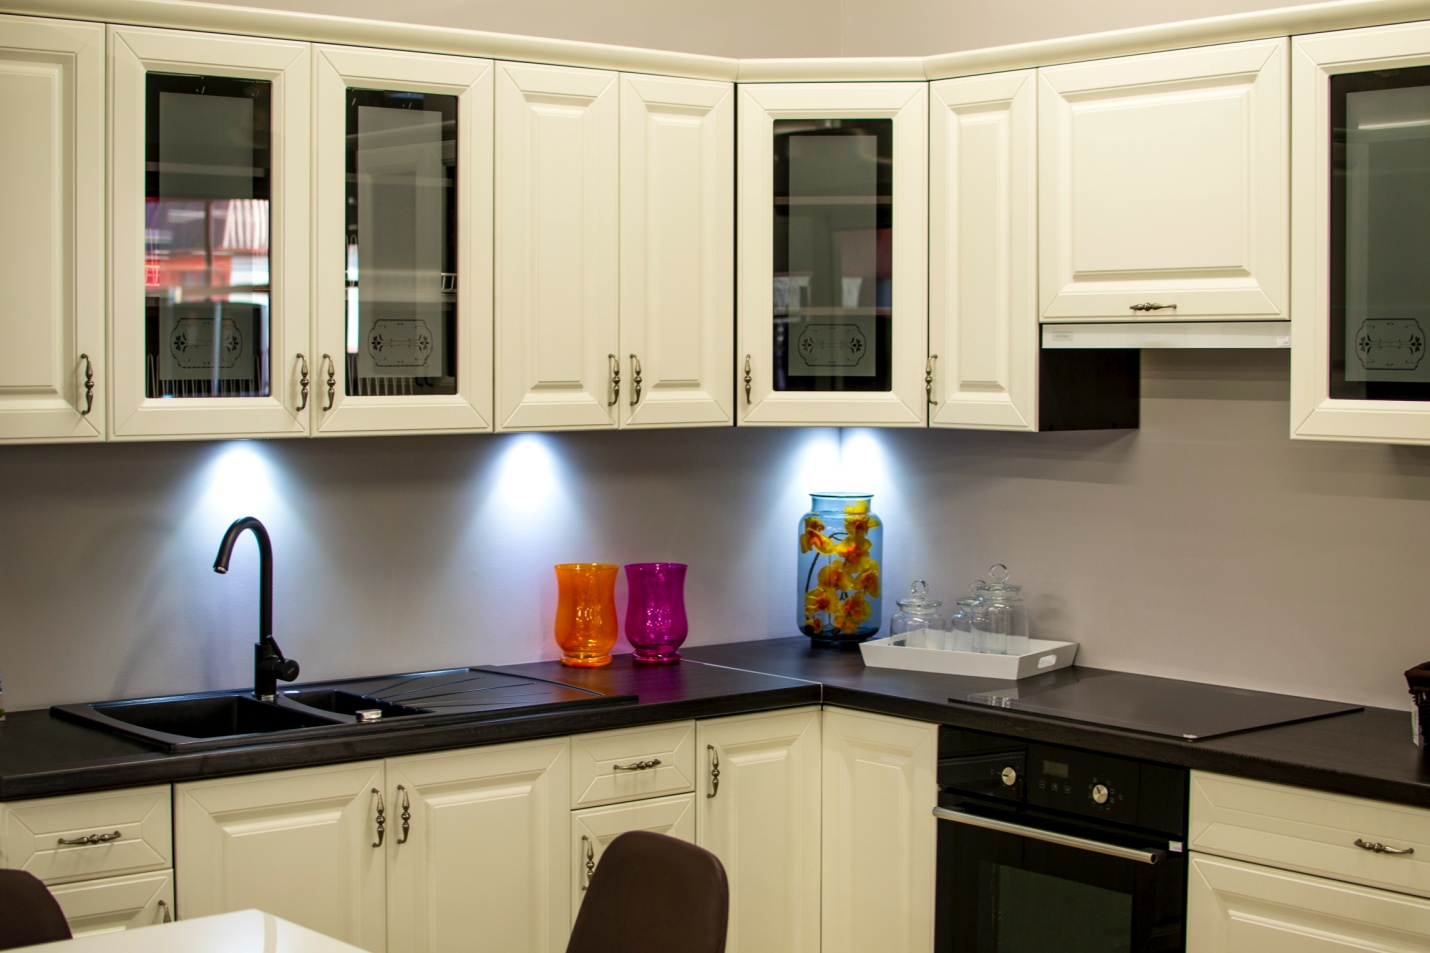 White kitchen cabinets with laminate countertops